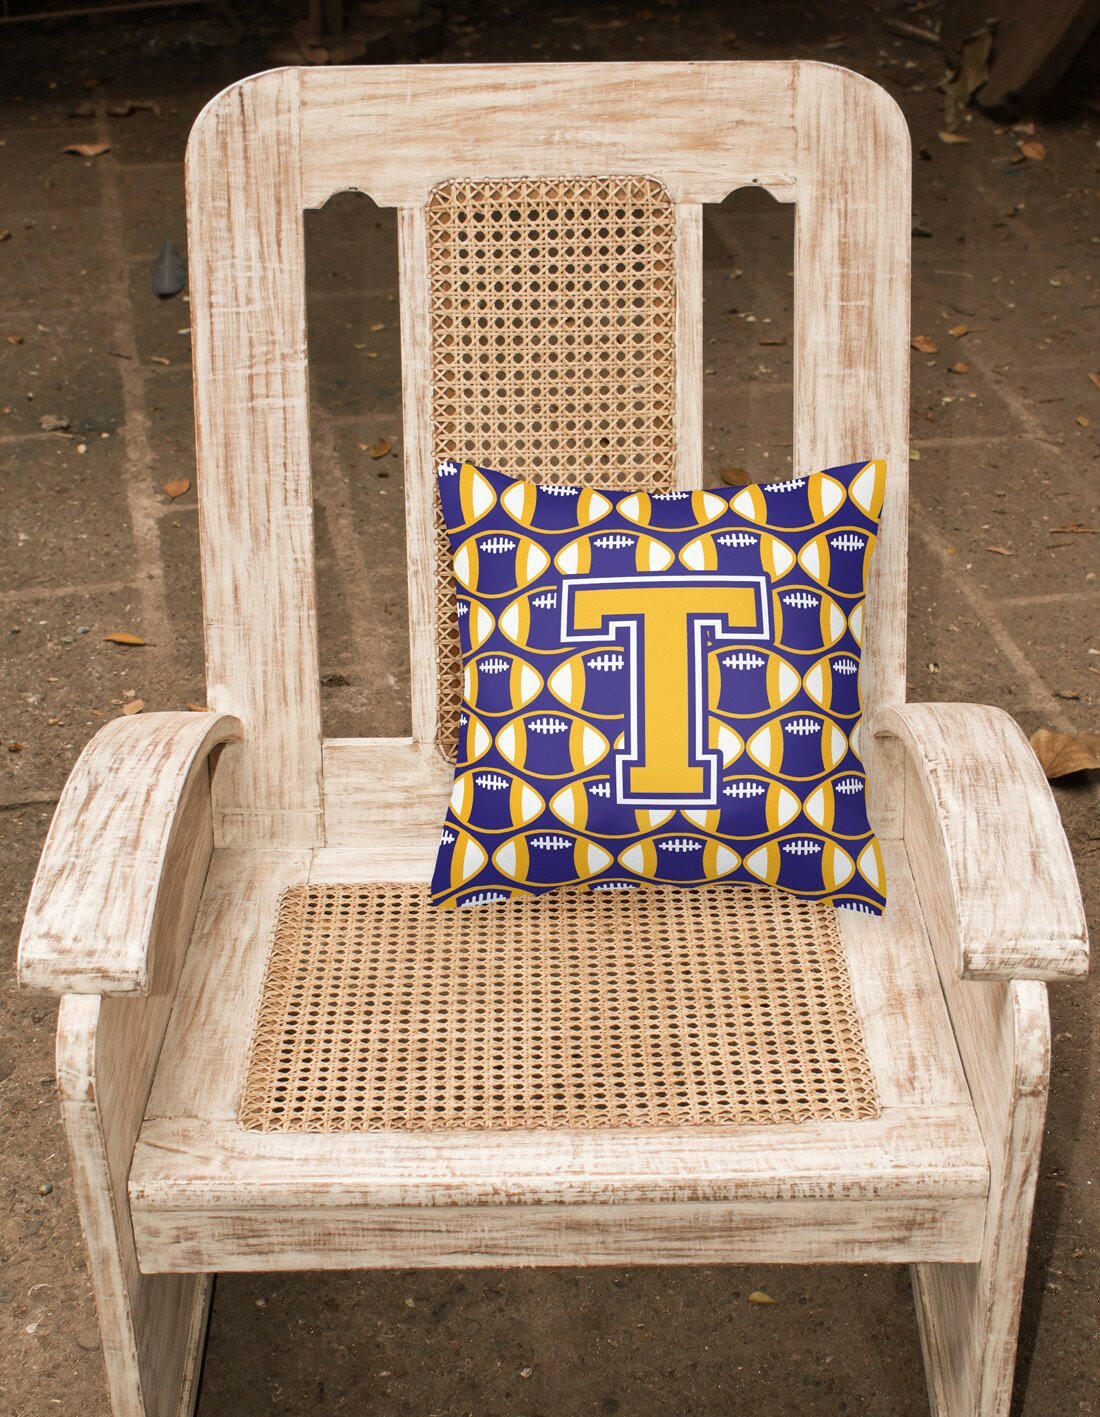 Letter T Football Purple and Gold Fabric Decorative Pillow CJ1064-TPW1414 by Caroline's Treasures